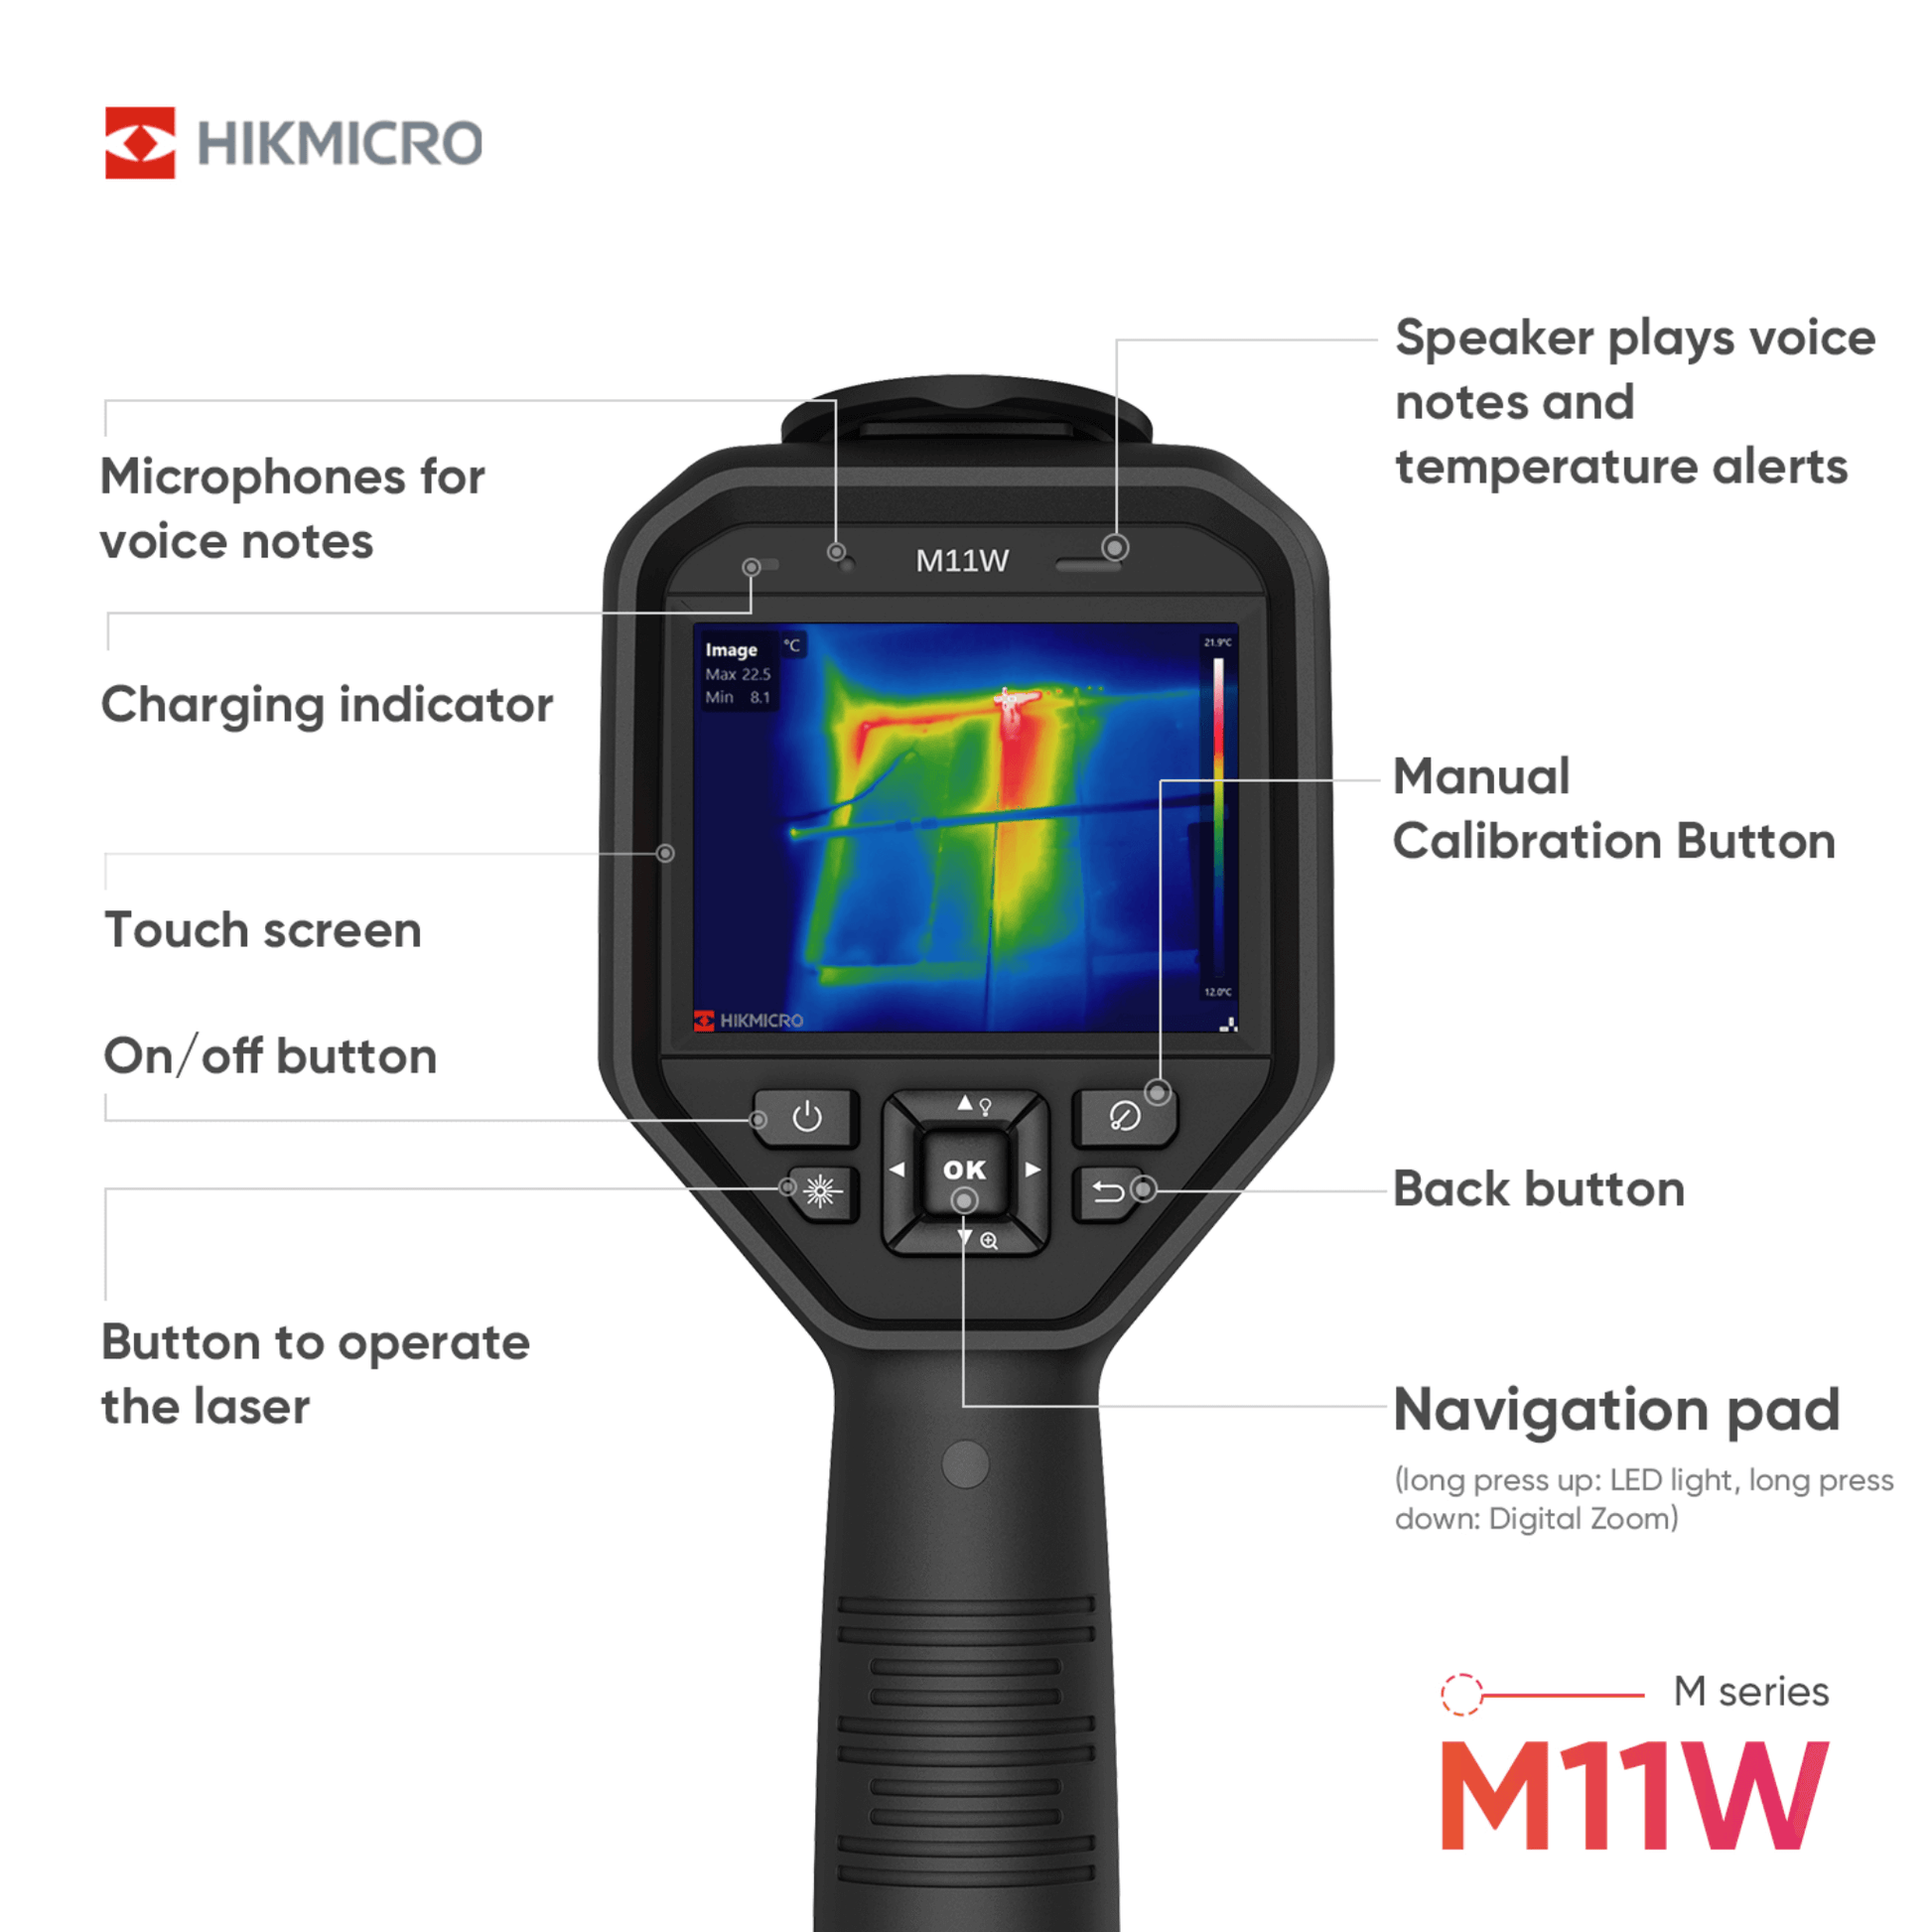 HikMicro M11W Handheld Thermography Camera physical features 1